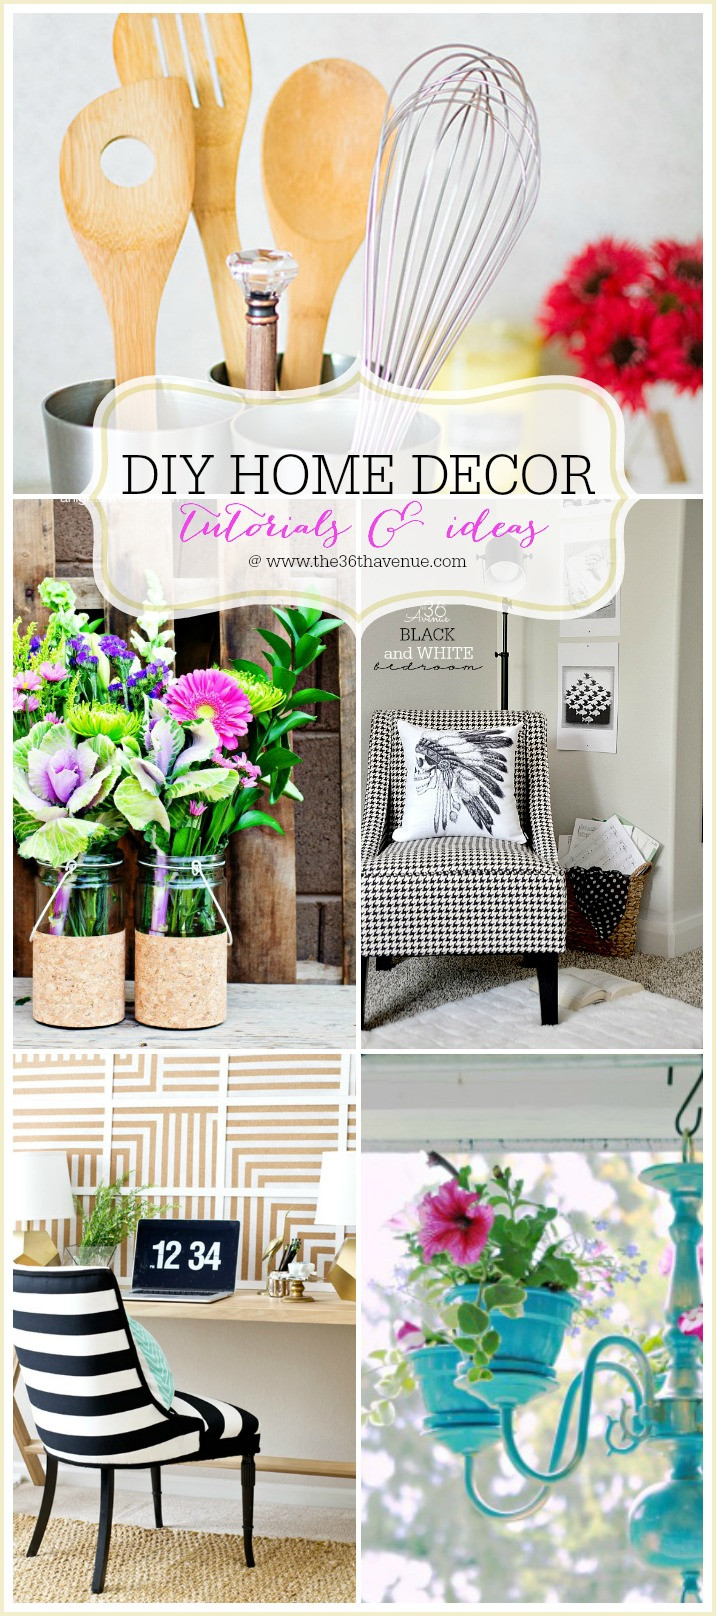 Easy DIY Projects For Home Decor
 The 36th AVENUE Home Decor DIY Projects